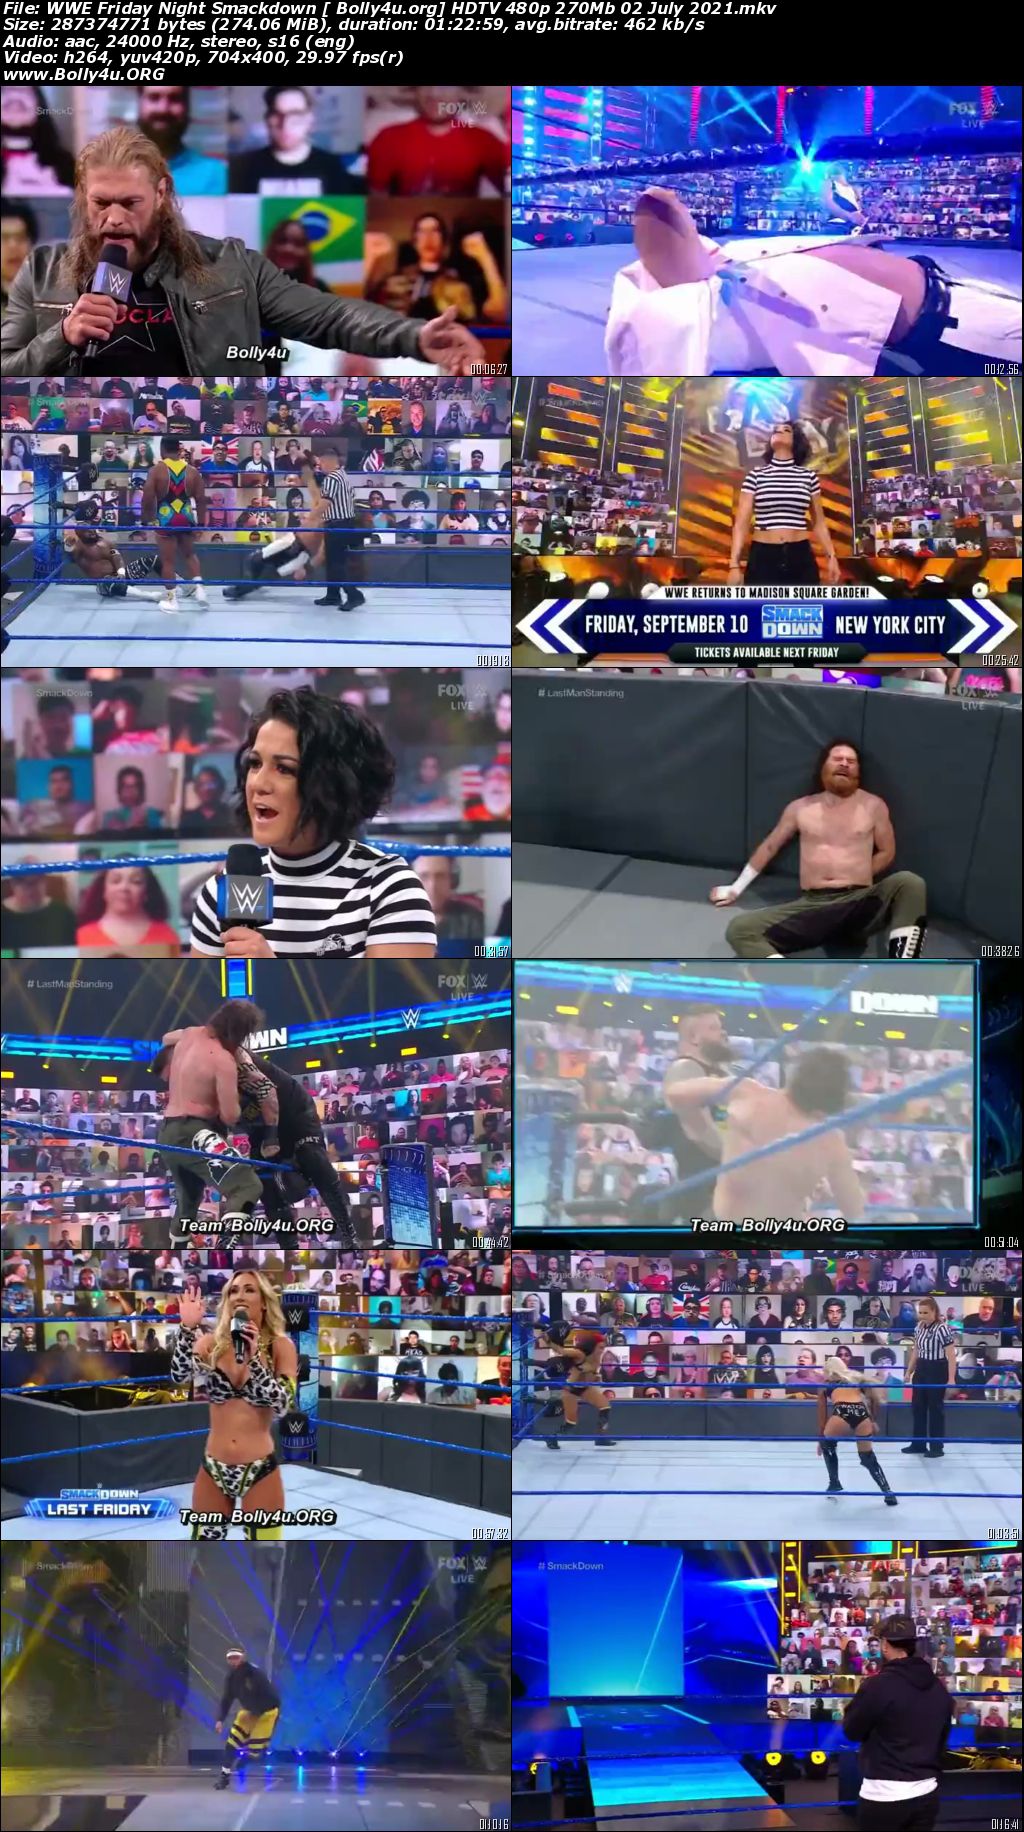 WWE Friday Night Smackdown HDTV 480p 270Mb 02 July 2021 Download